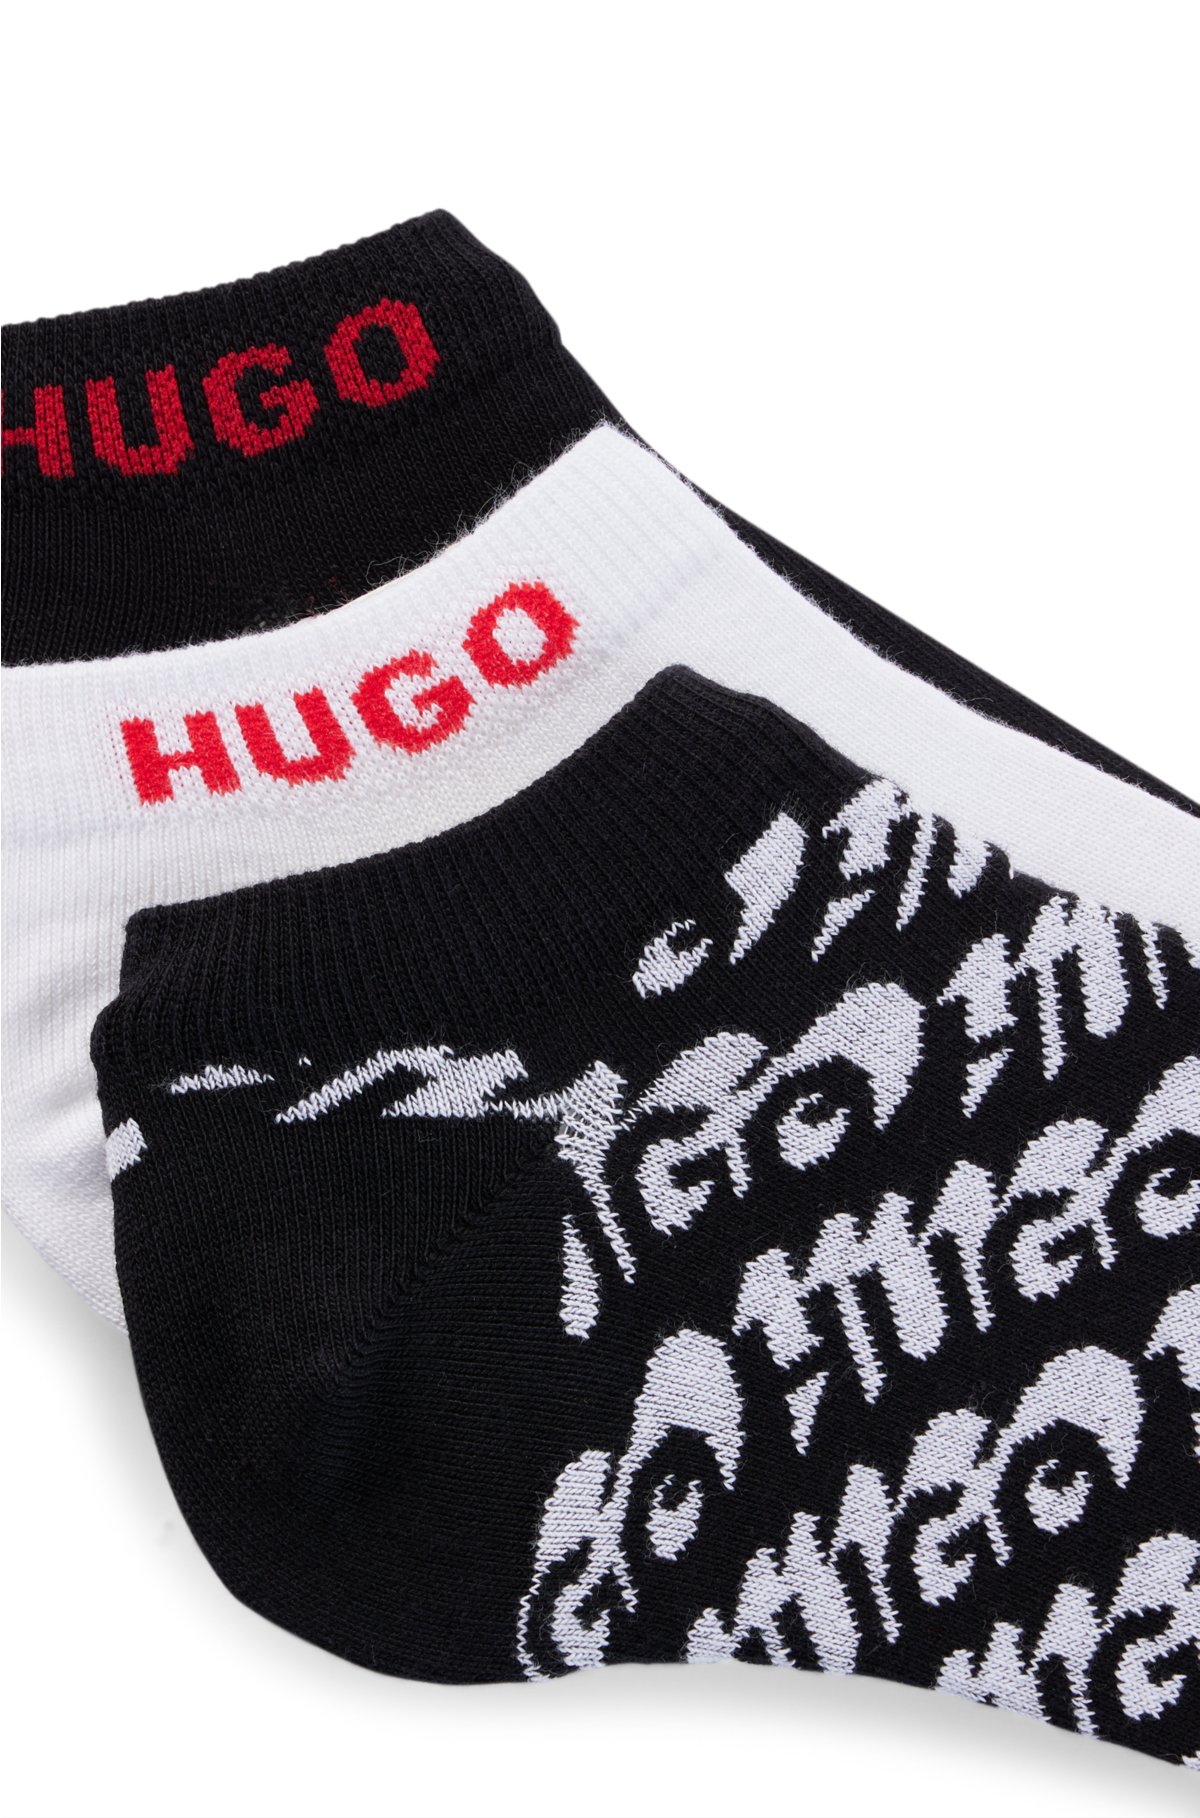 Three-pack of cotton-blend ankle socks with logos, Black